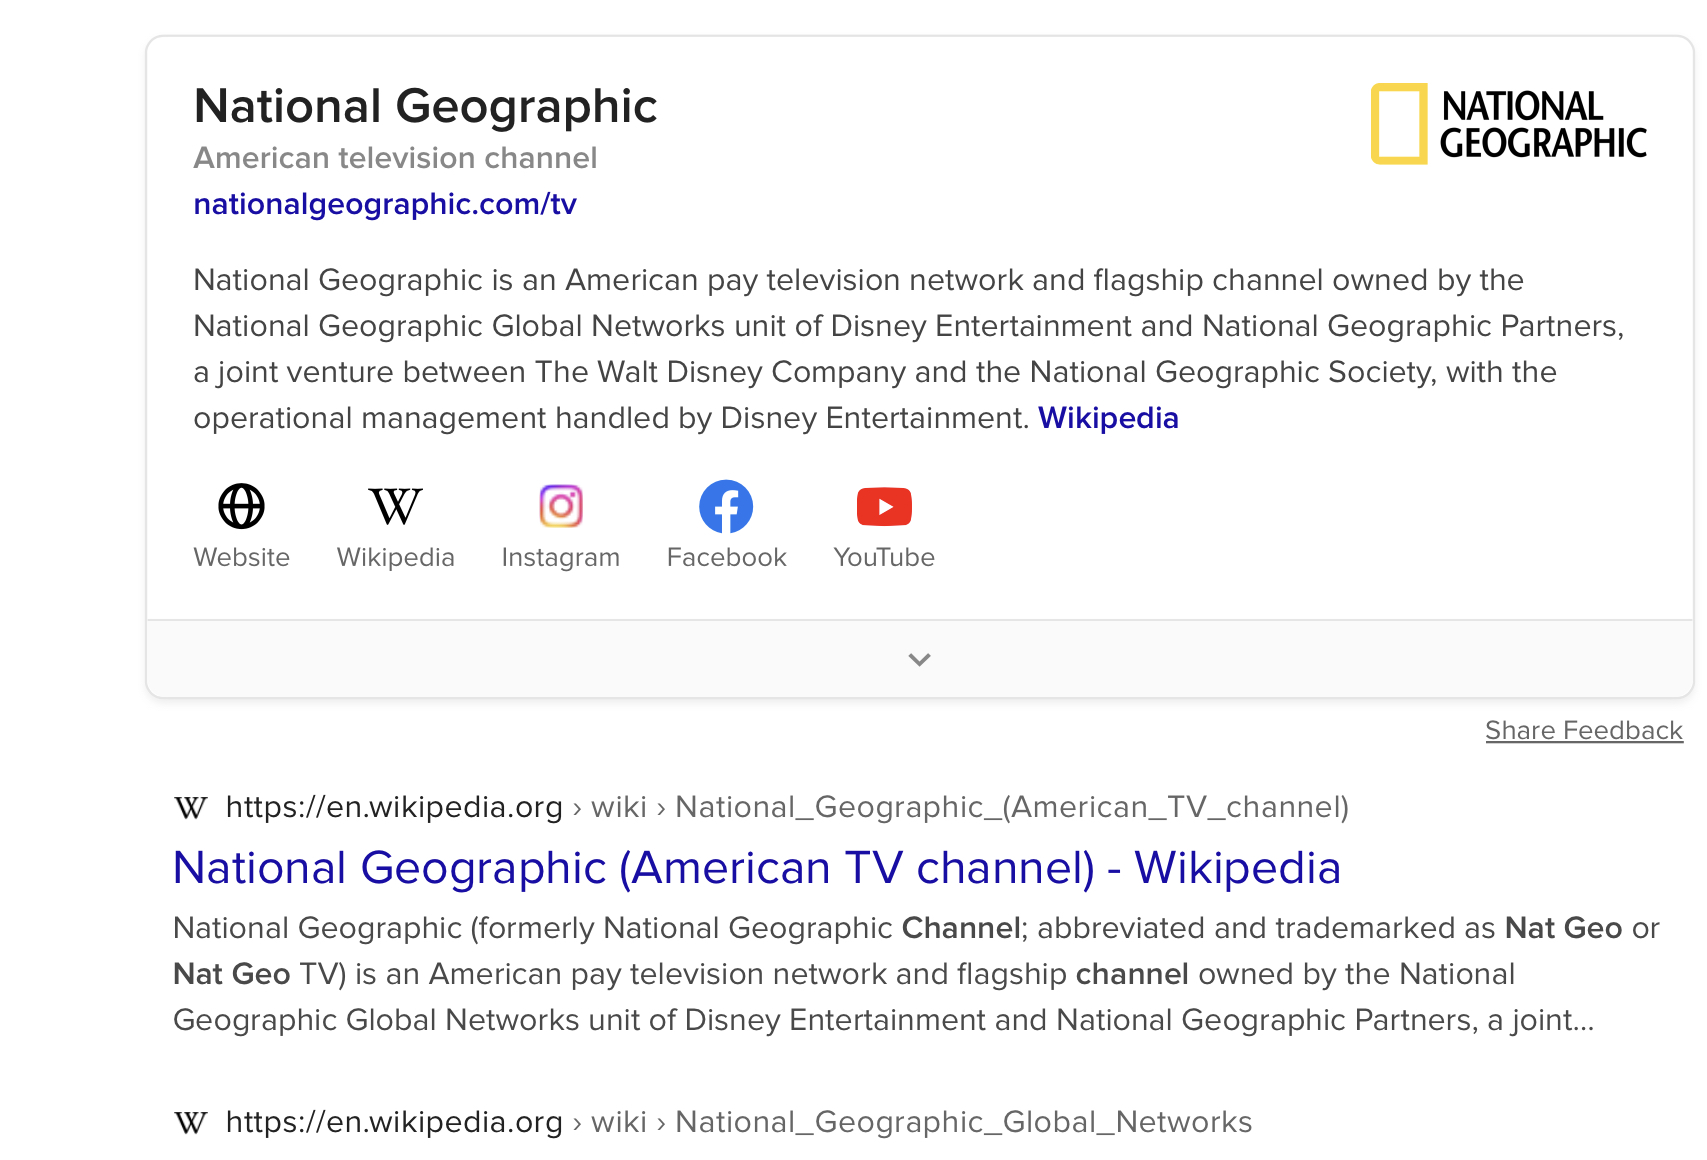 National Geographic Partners - Wikipedia